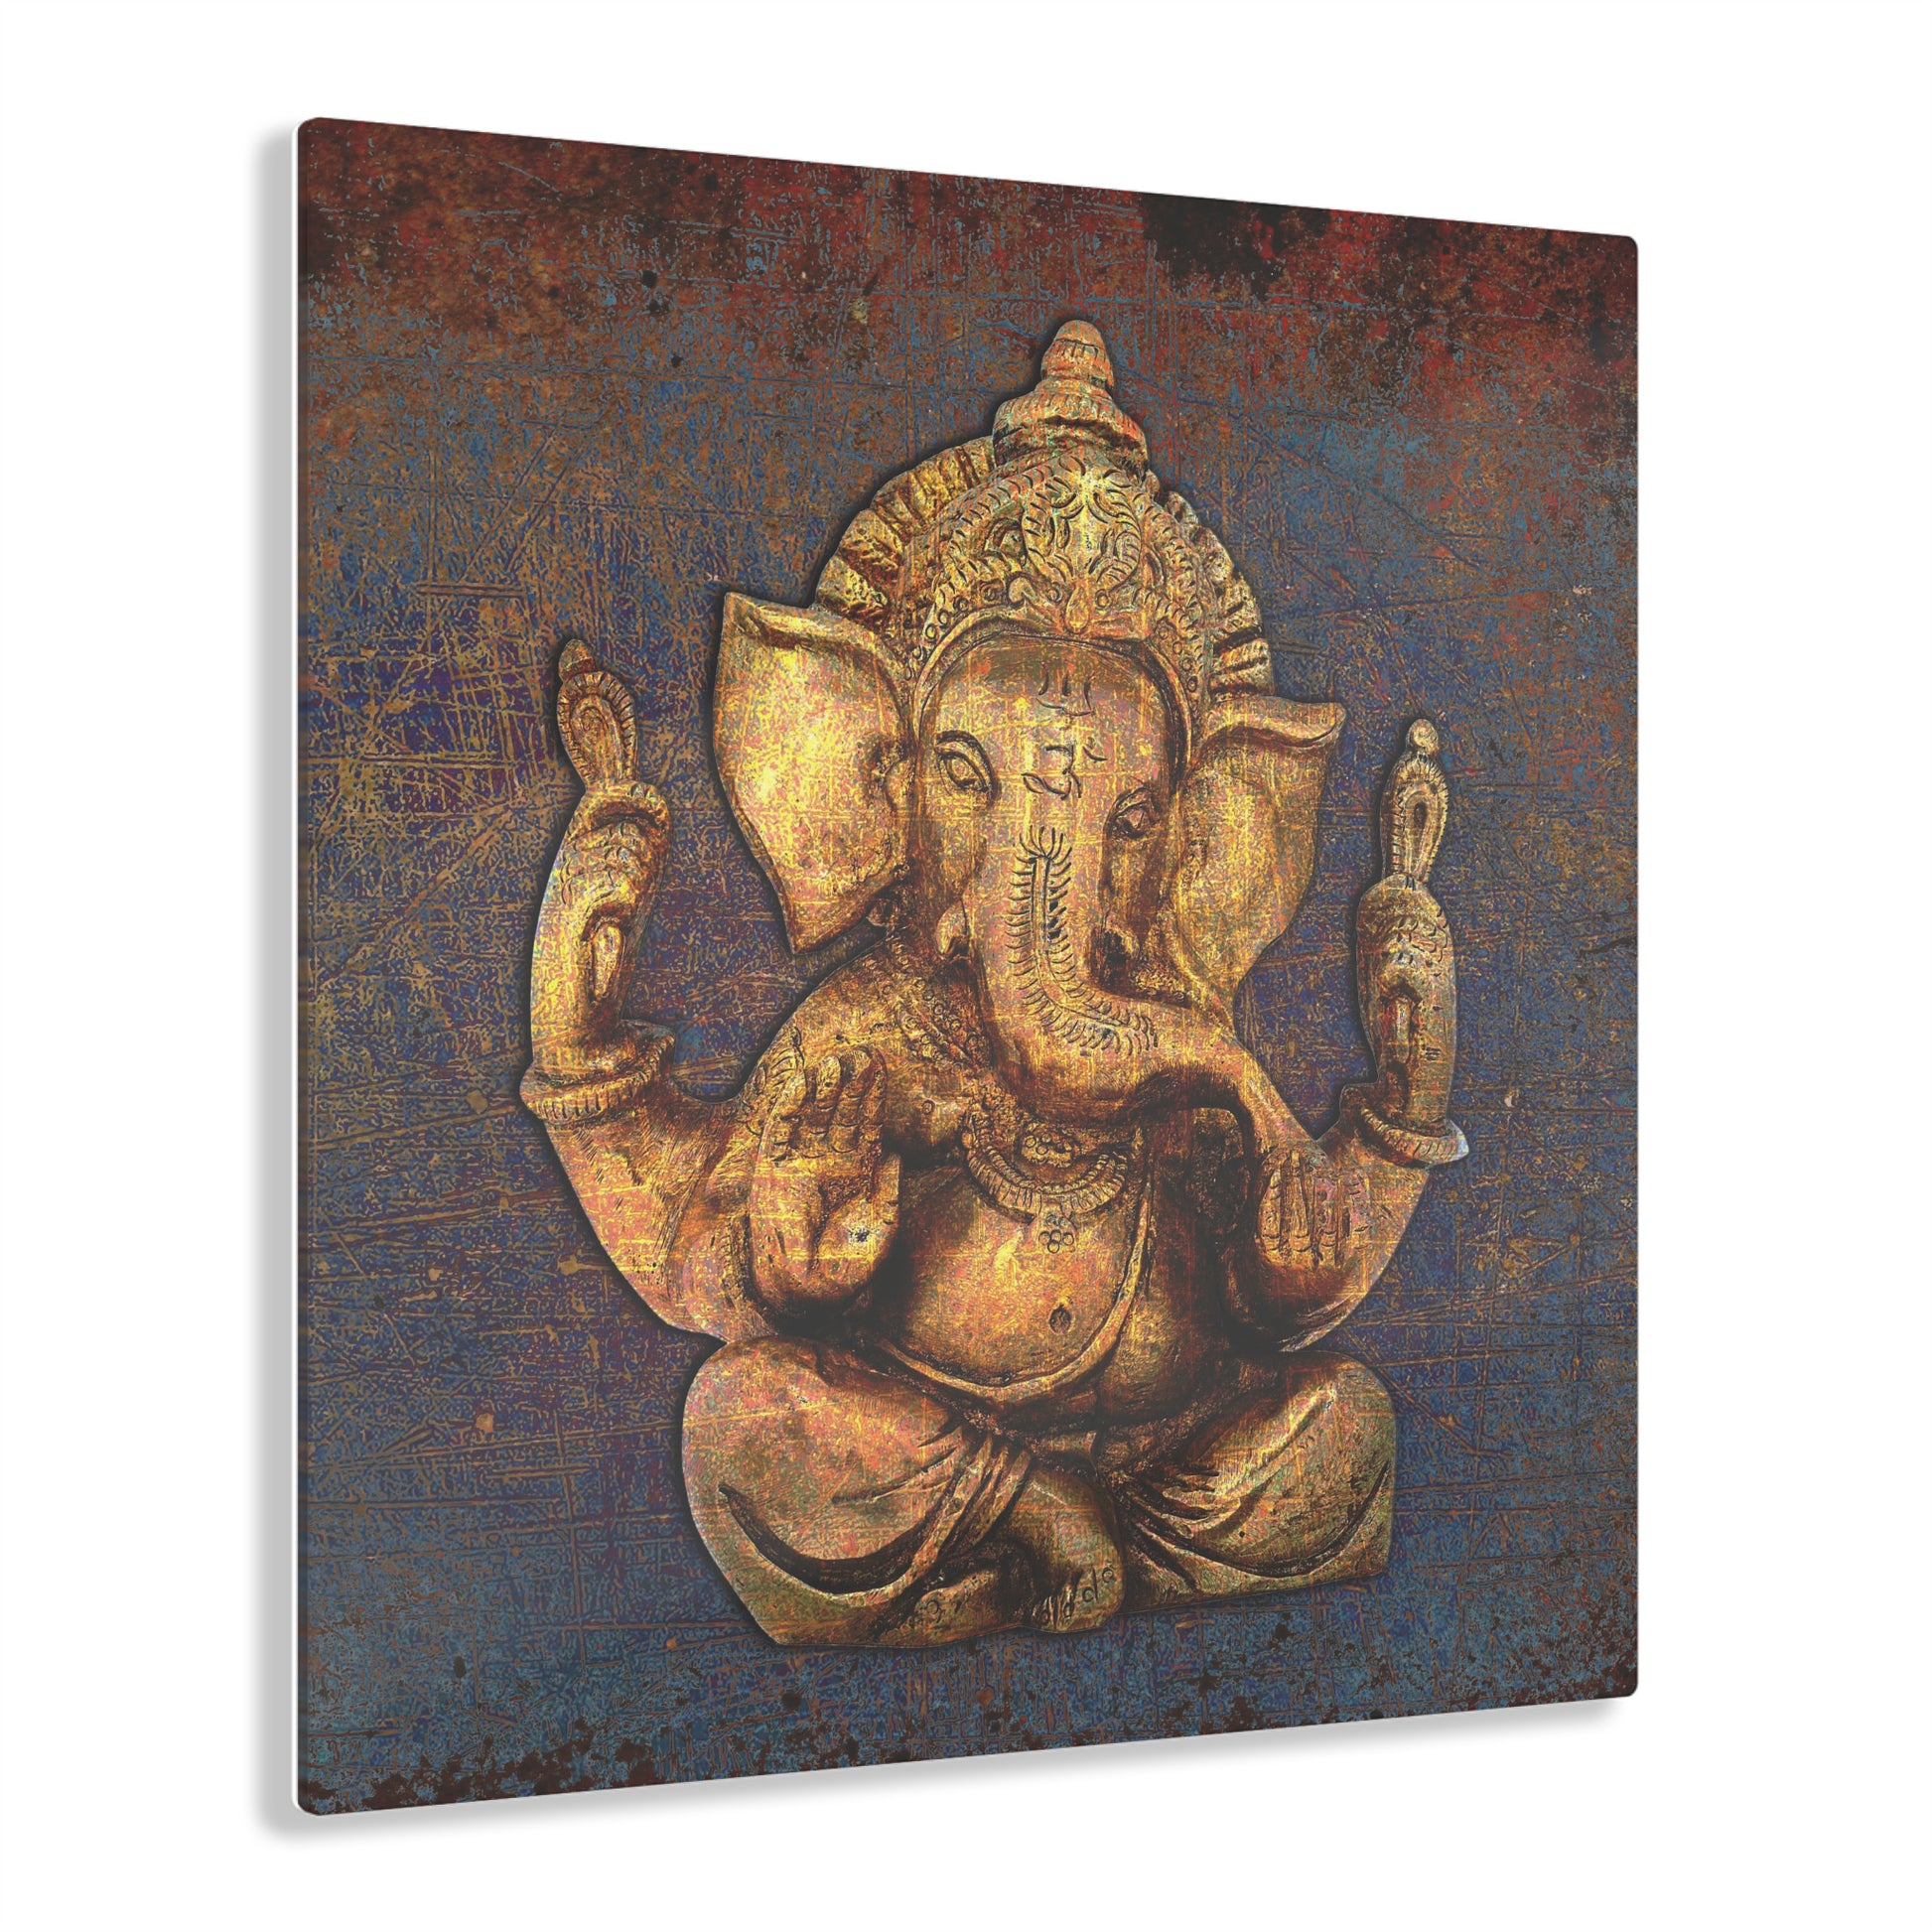 Hindu Themed Wall Art - Golden Ganesha on a Distressed Purple and Orange Background Printed on a Crystal Clear Acrylic Panel